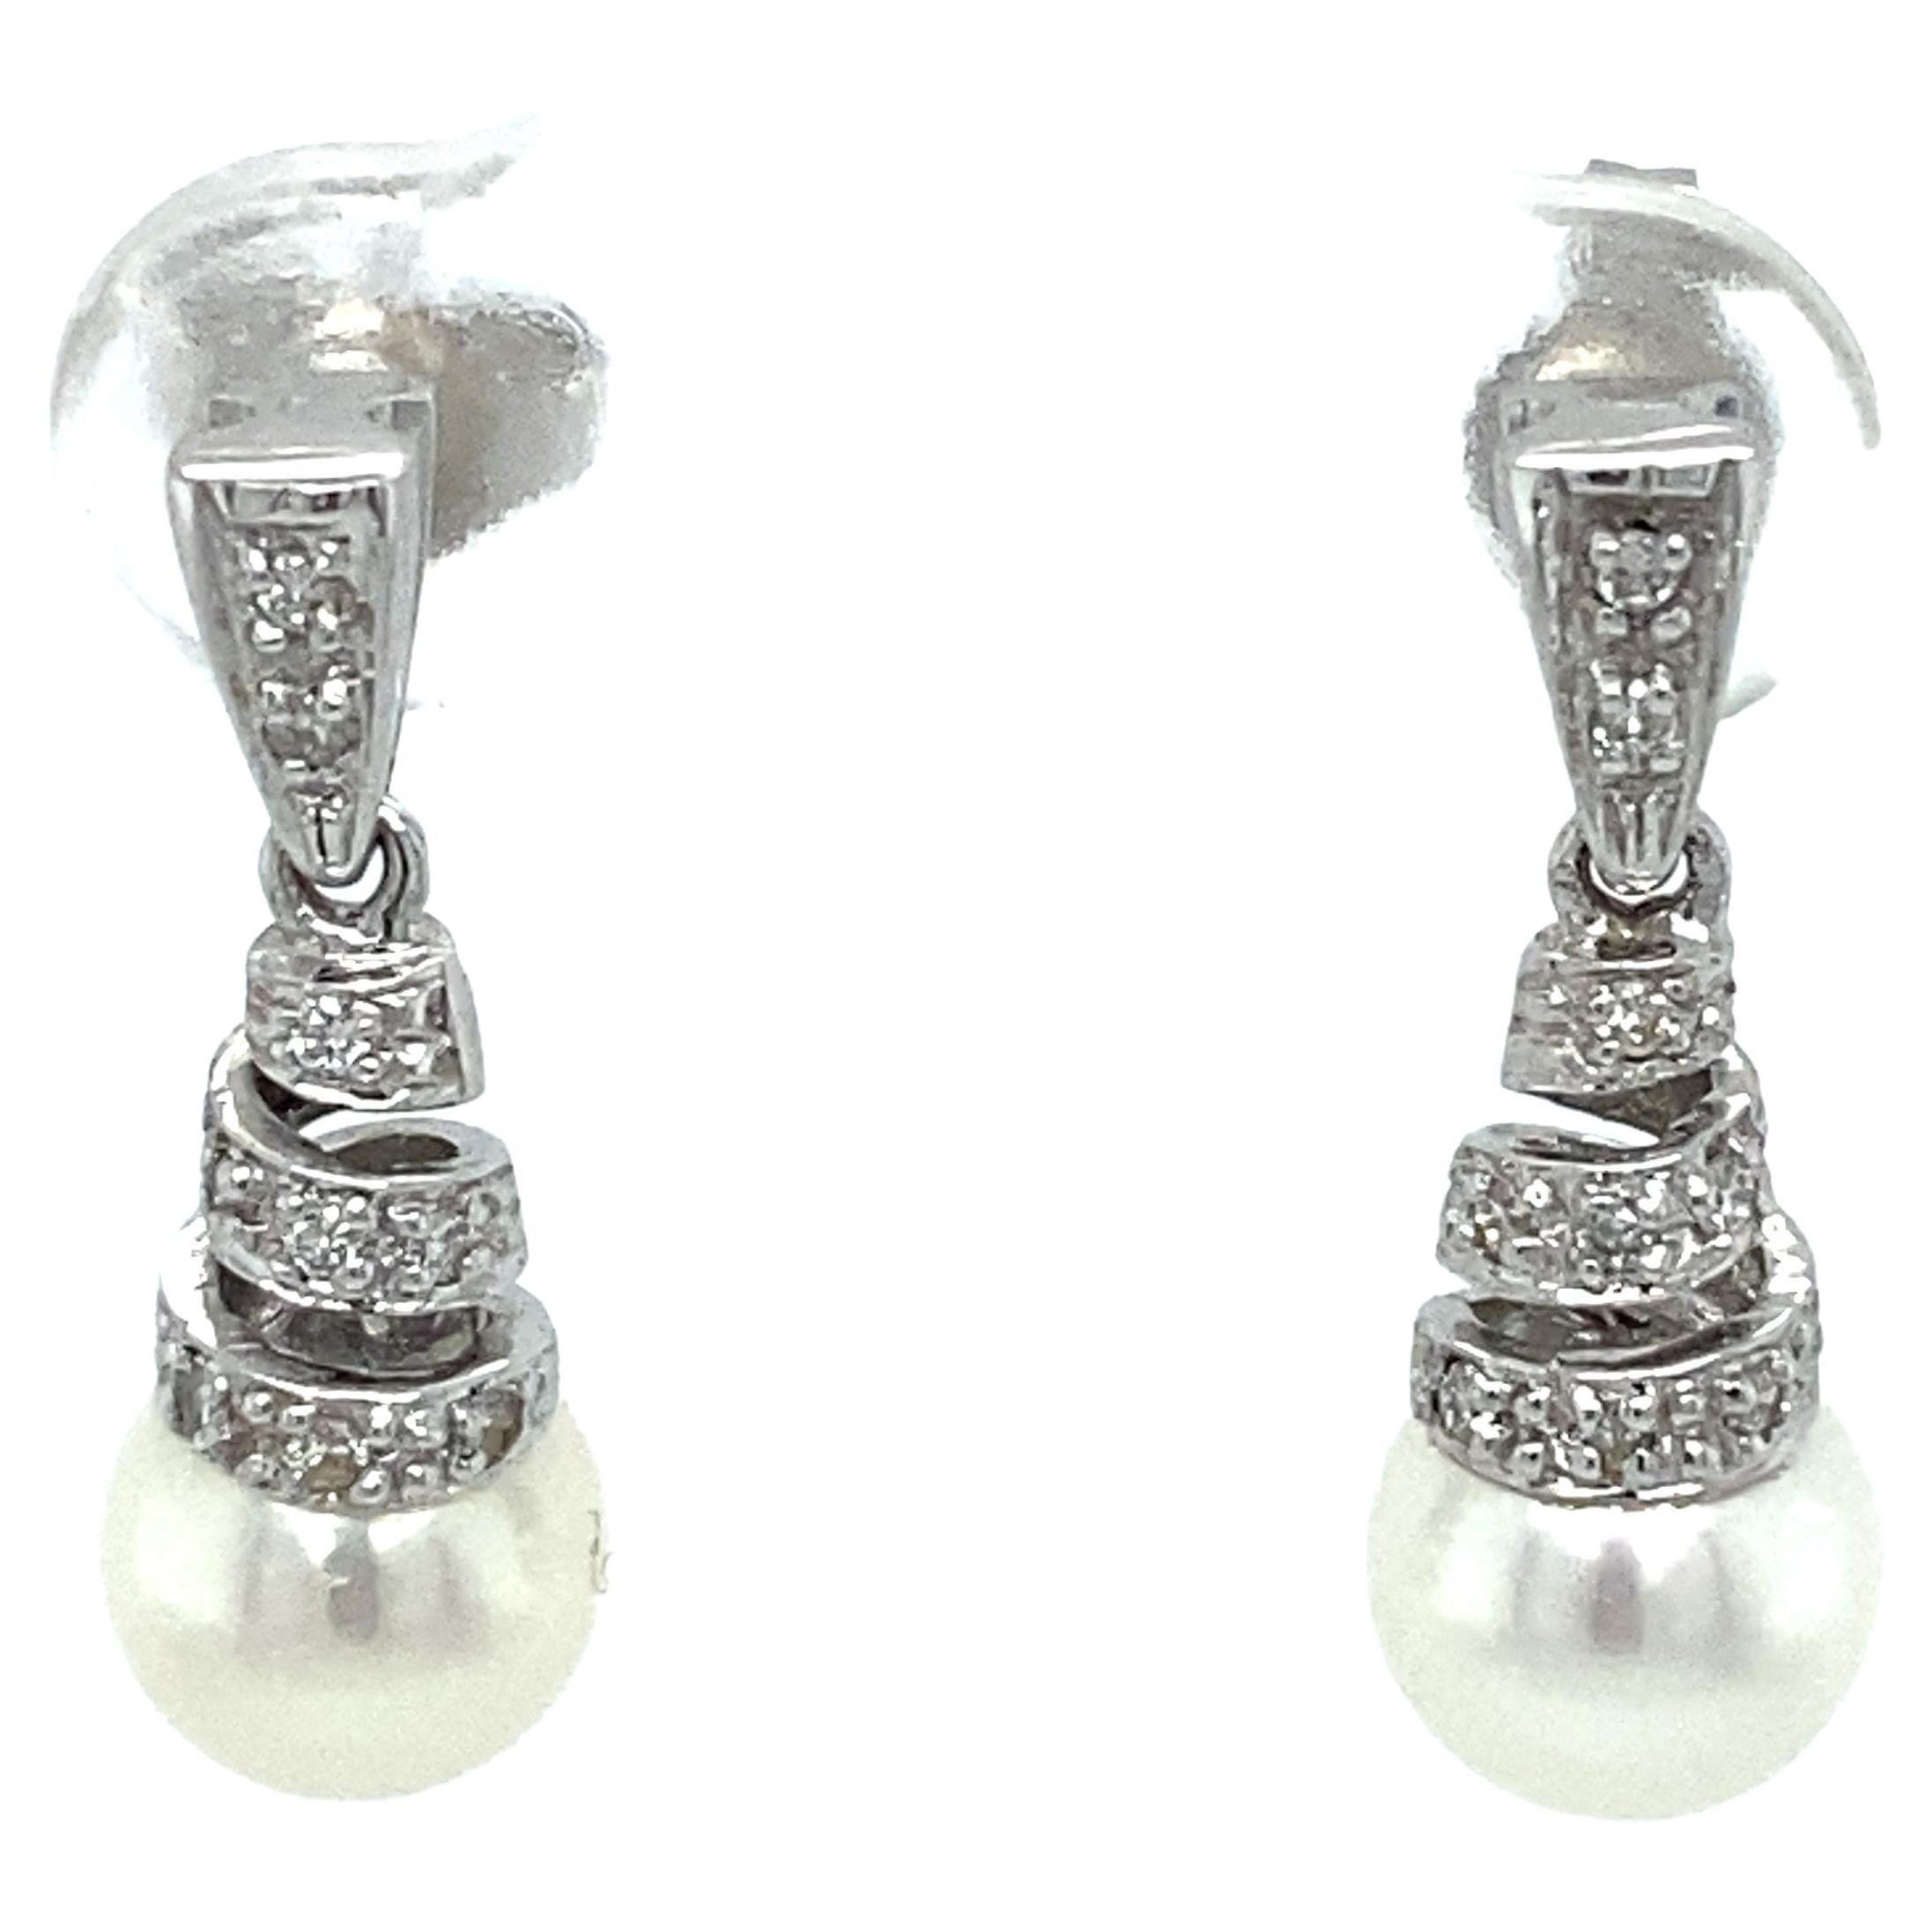 1990s Diamond and Pearl Spiral Drop Earrings in 14 Karat White Gold